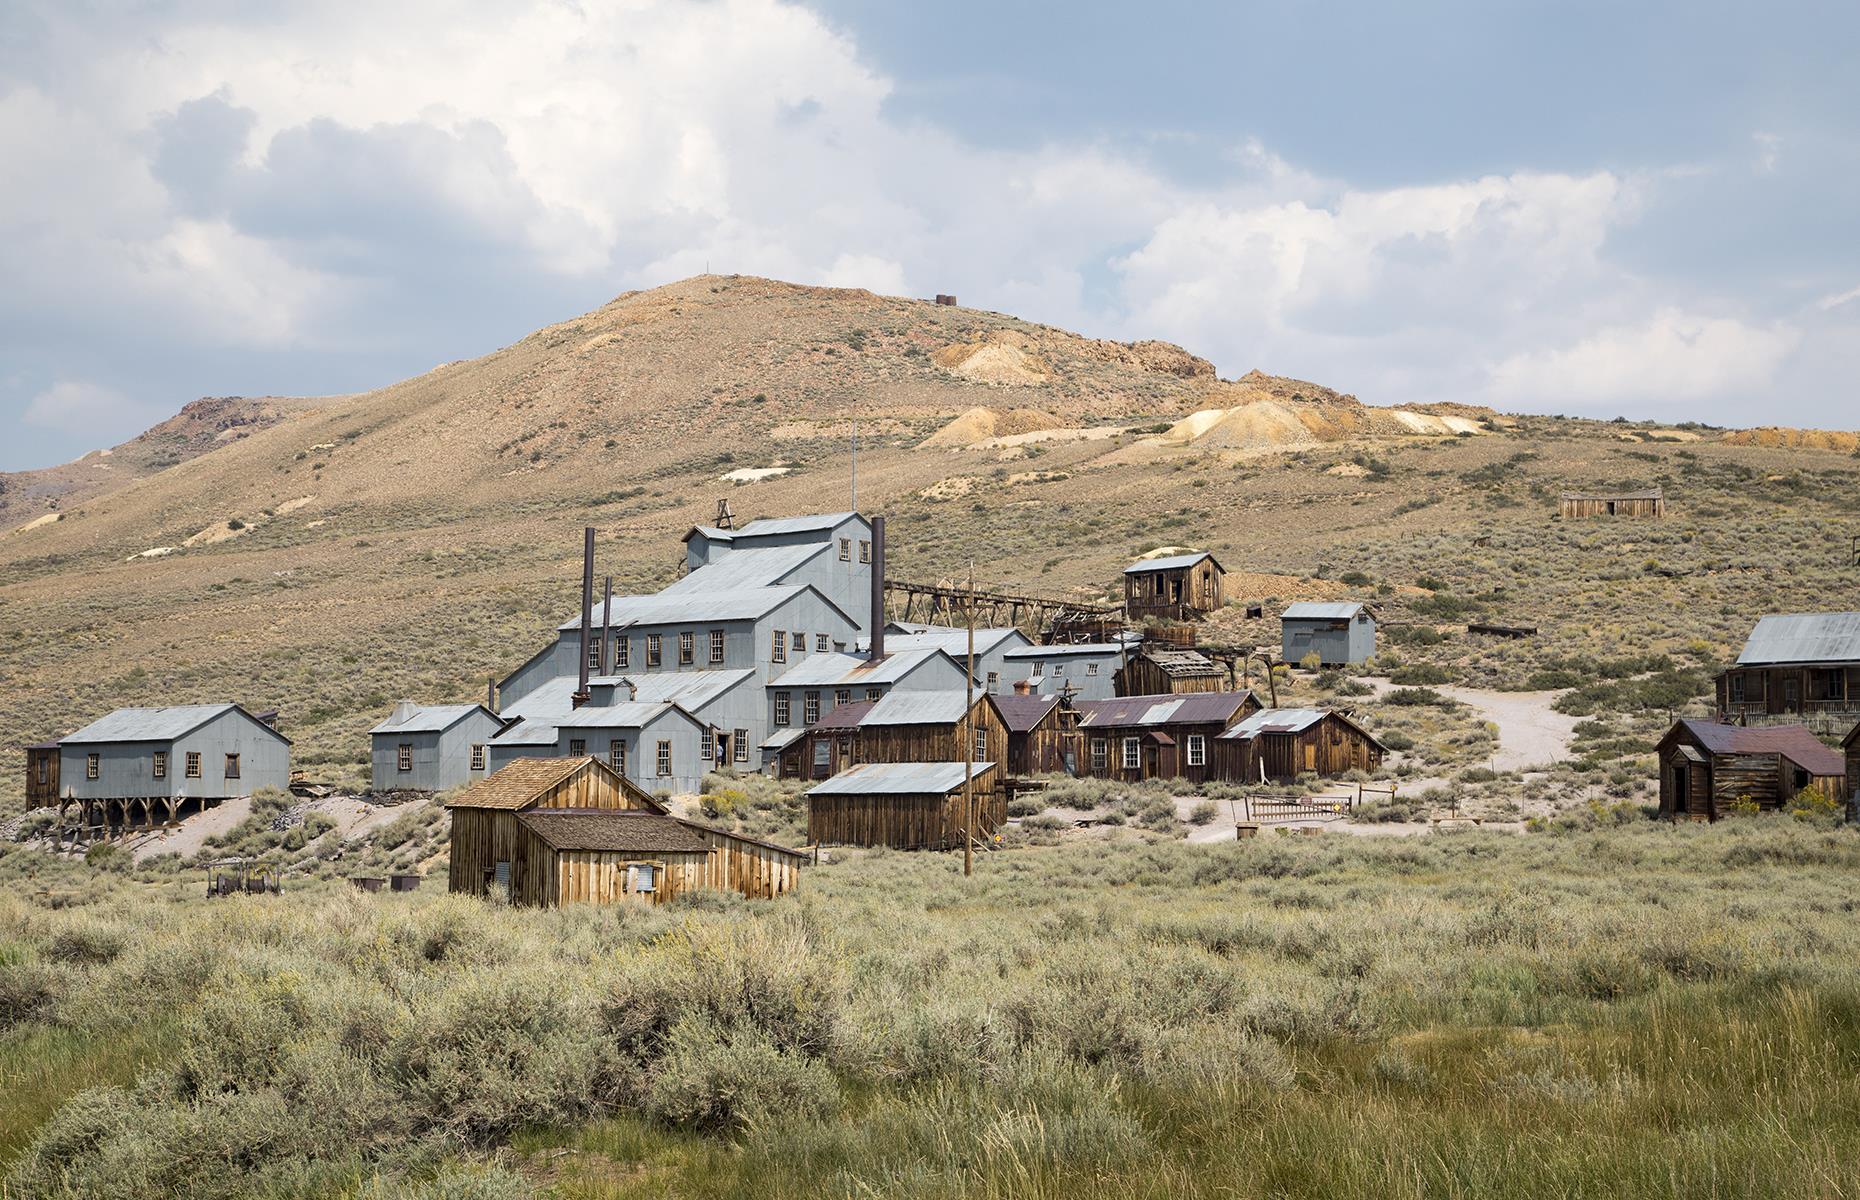 The ghost towns that got left behind